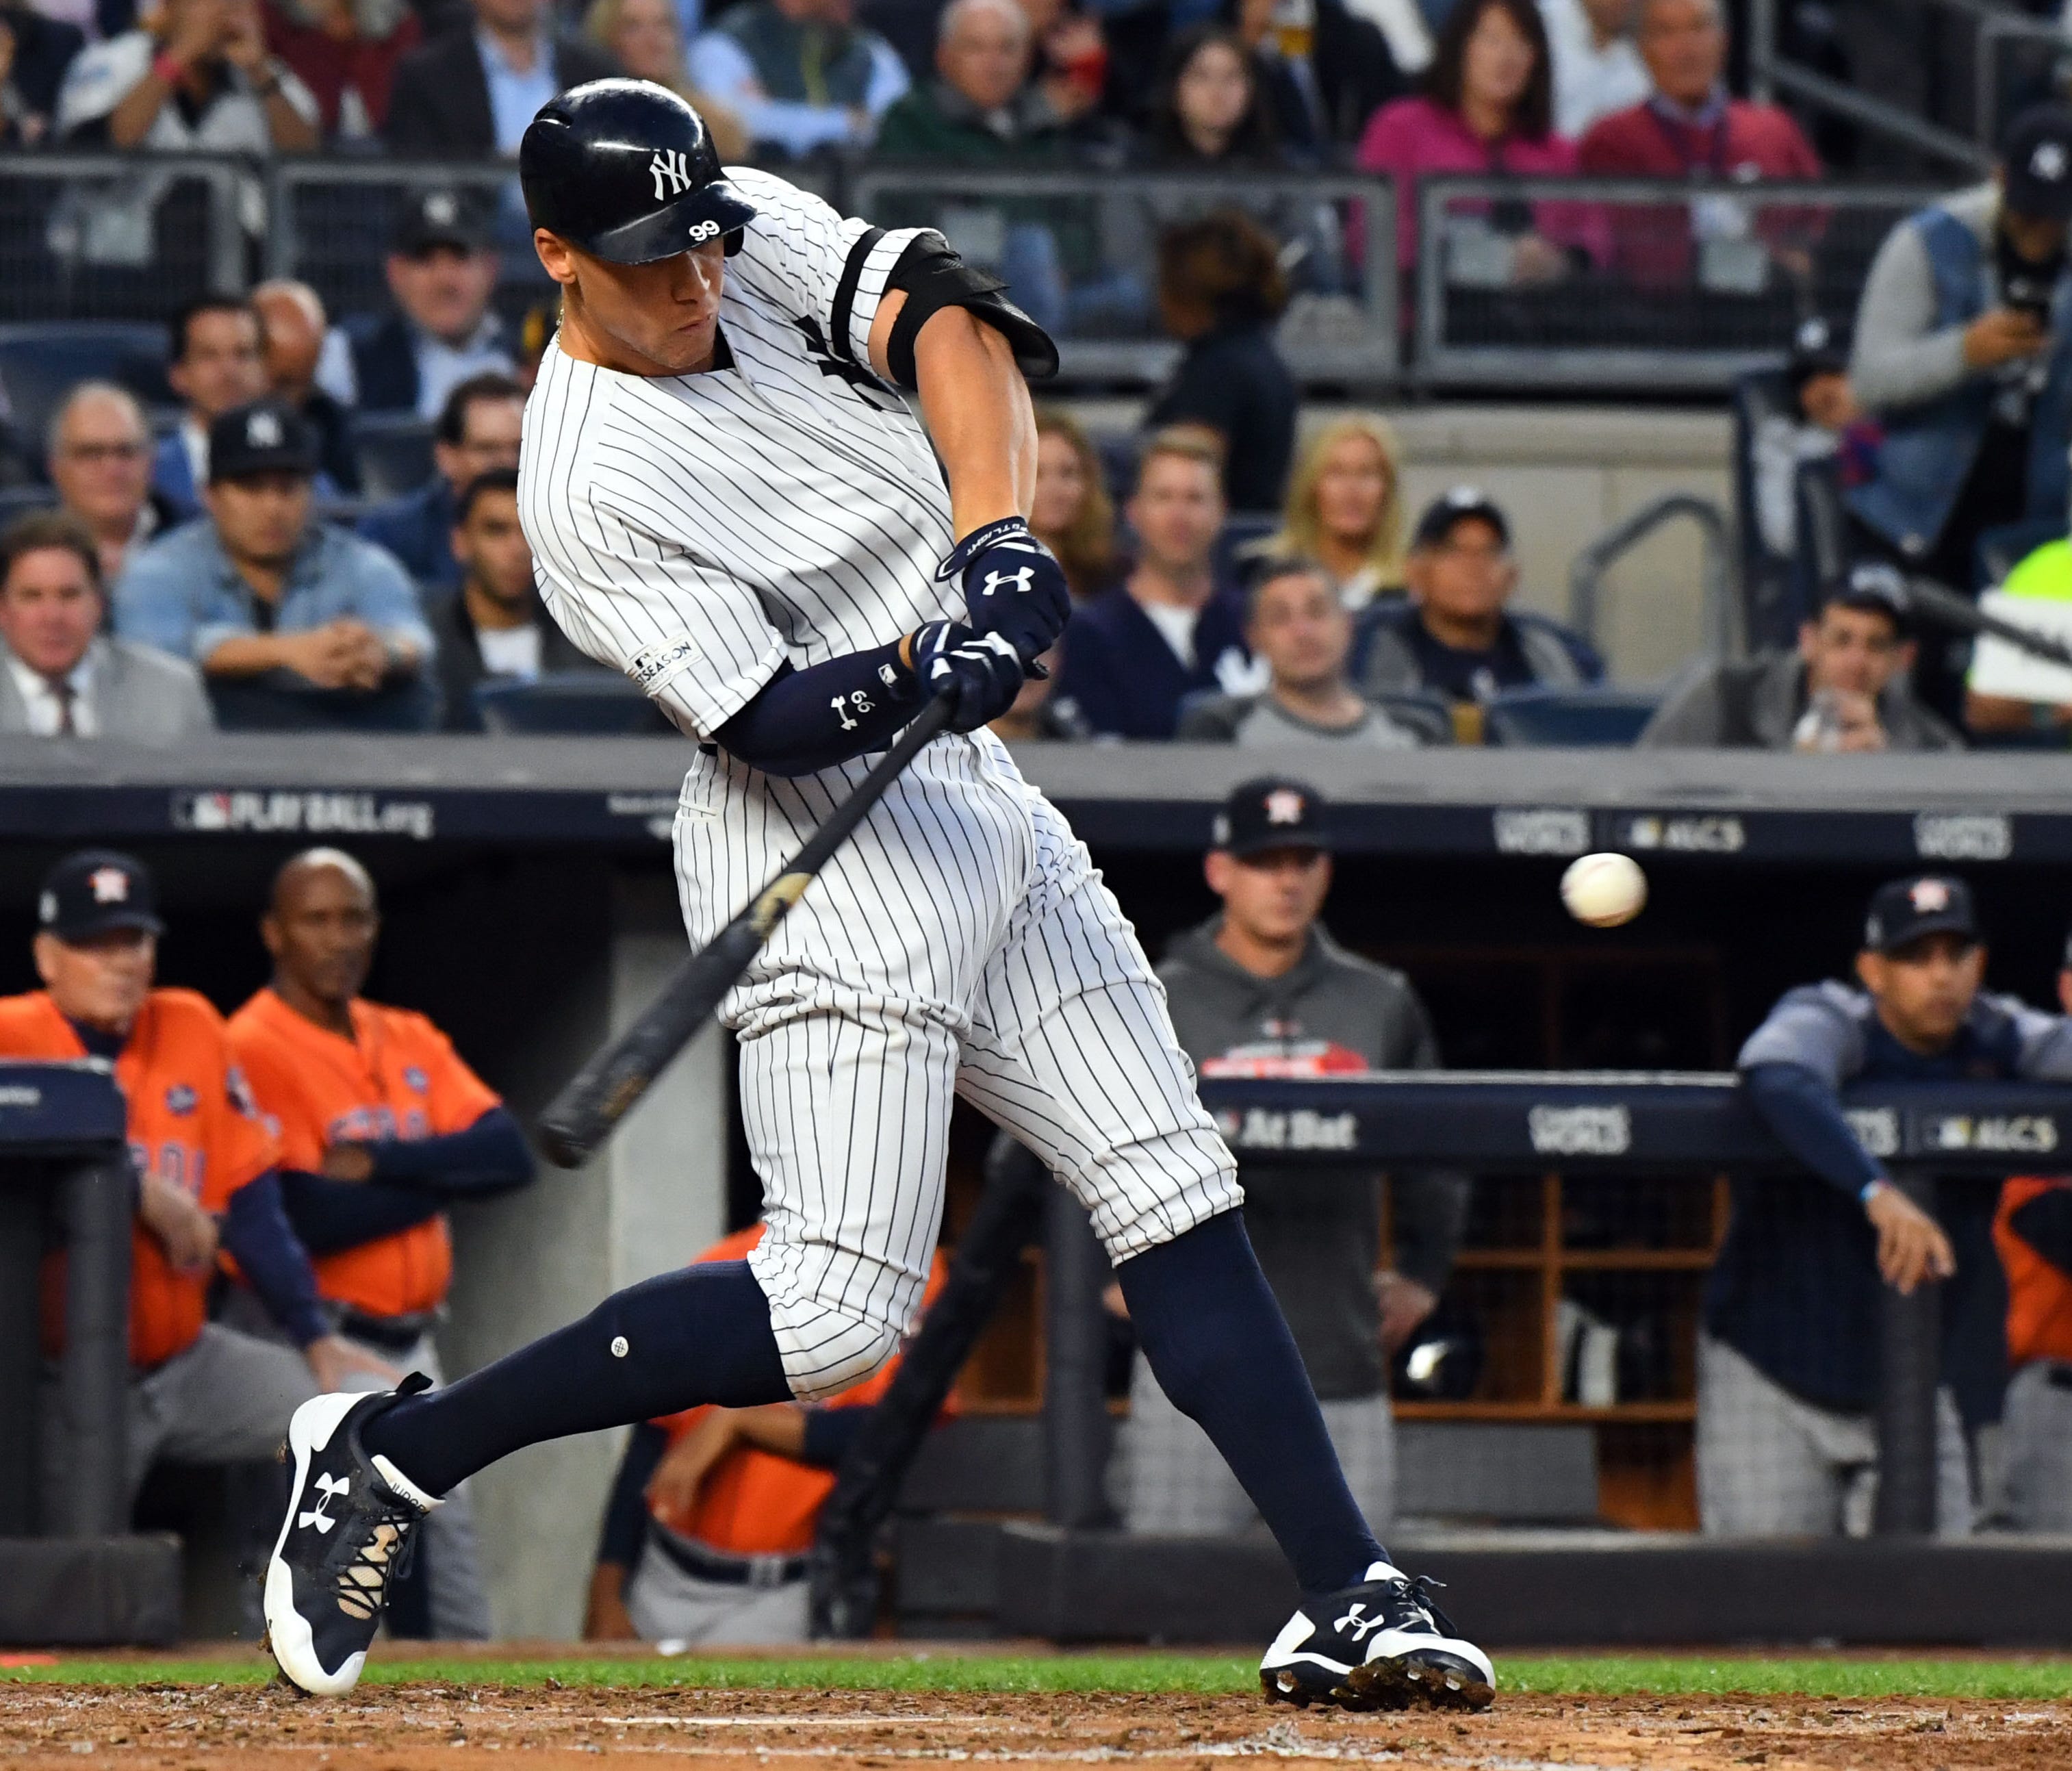 Aaron Judge flourished in three games at Yankee Stadium, but was just 1 for 7 in Games 1-2 at Houston.